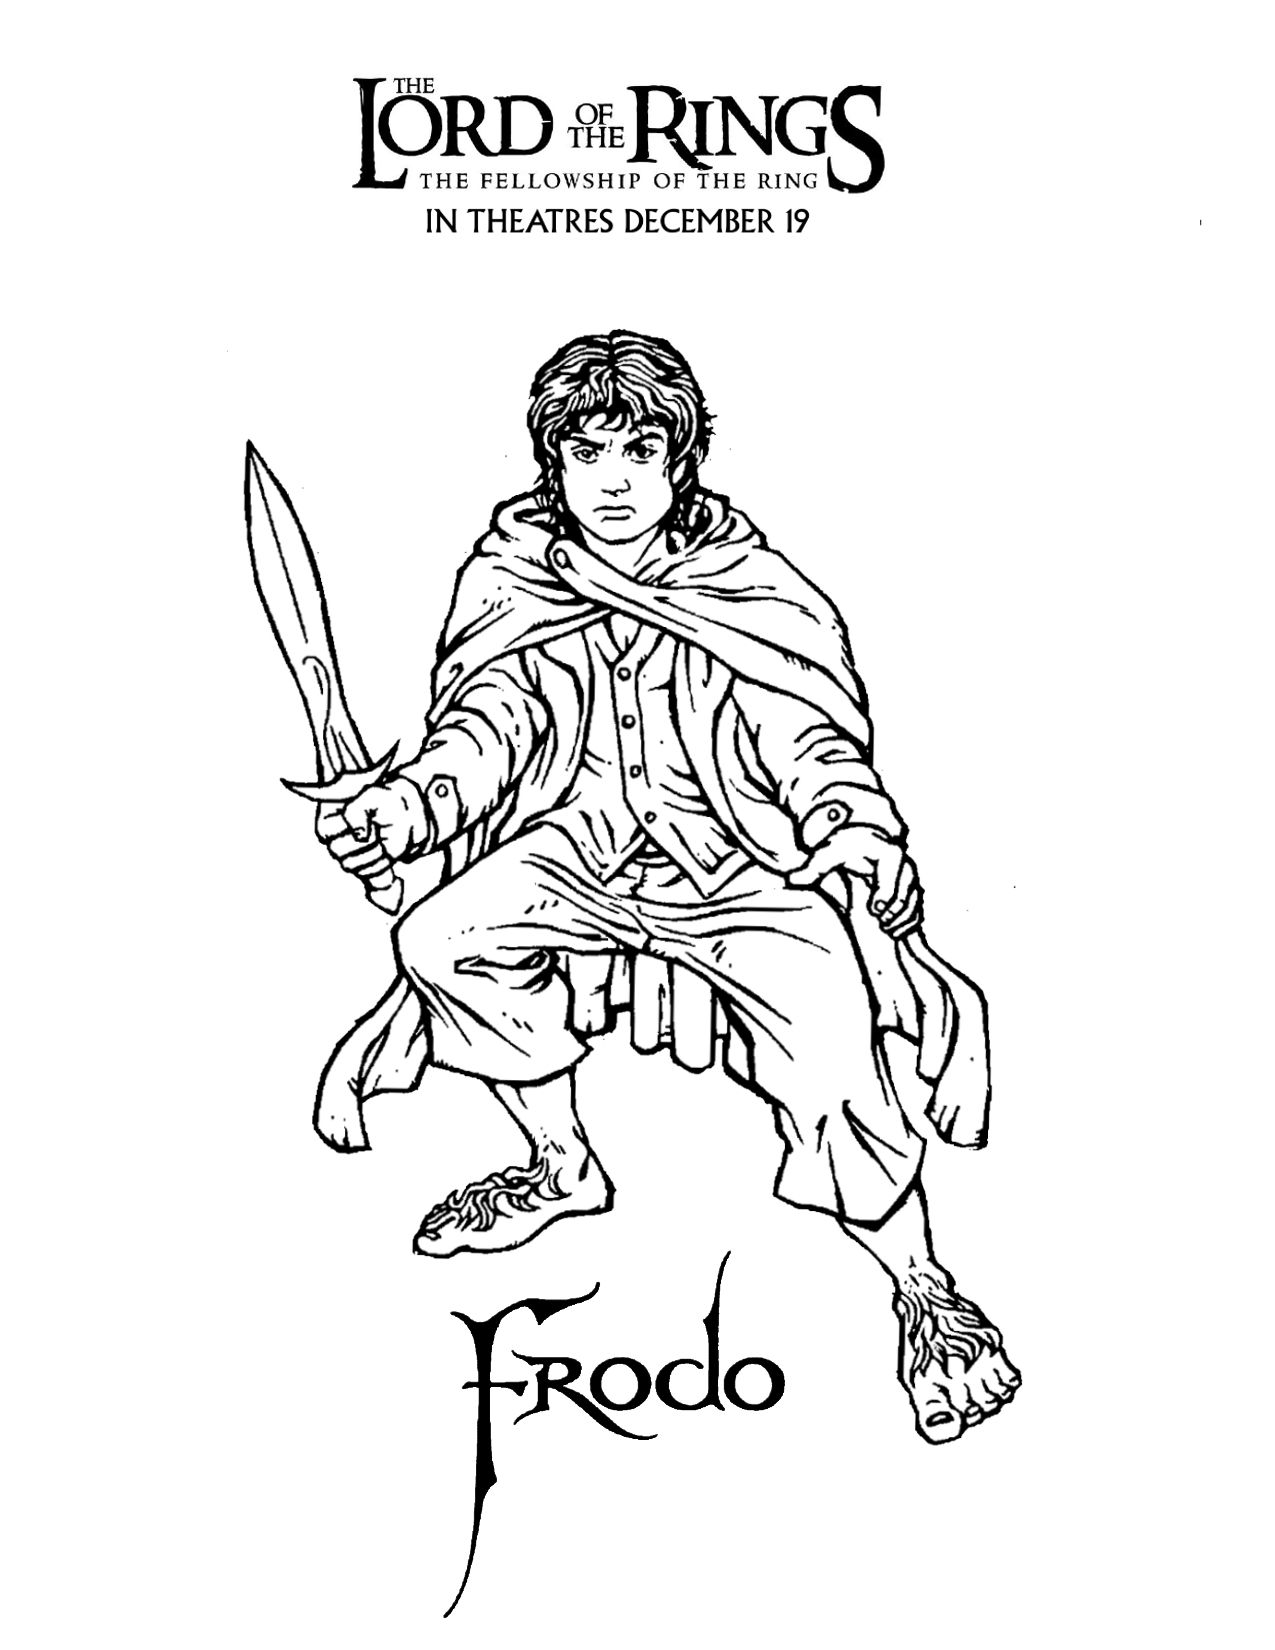 Lotr tfotr frodo coloring page coloring pages elves and fairies pattern art